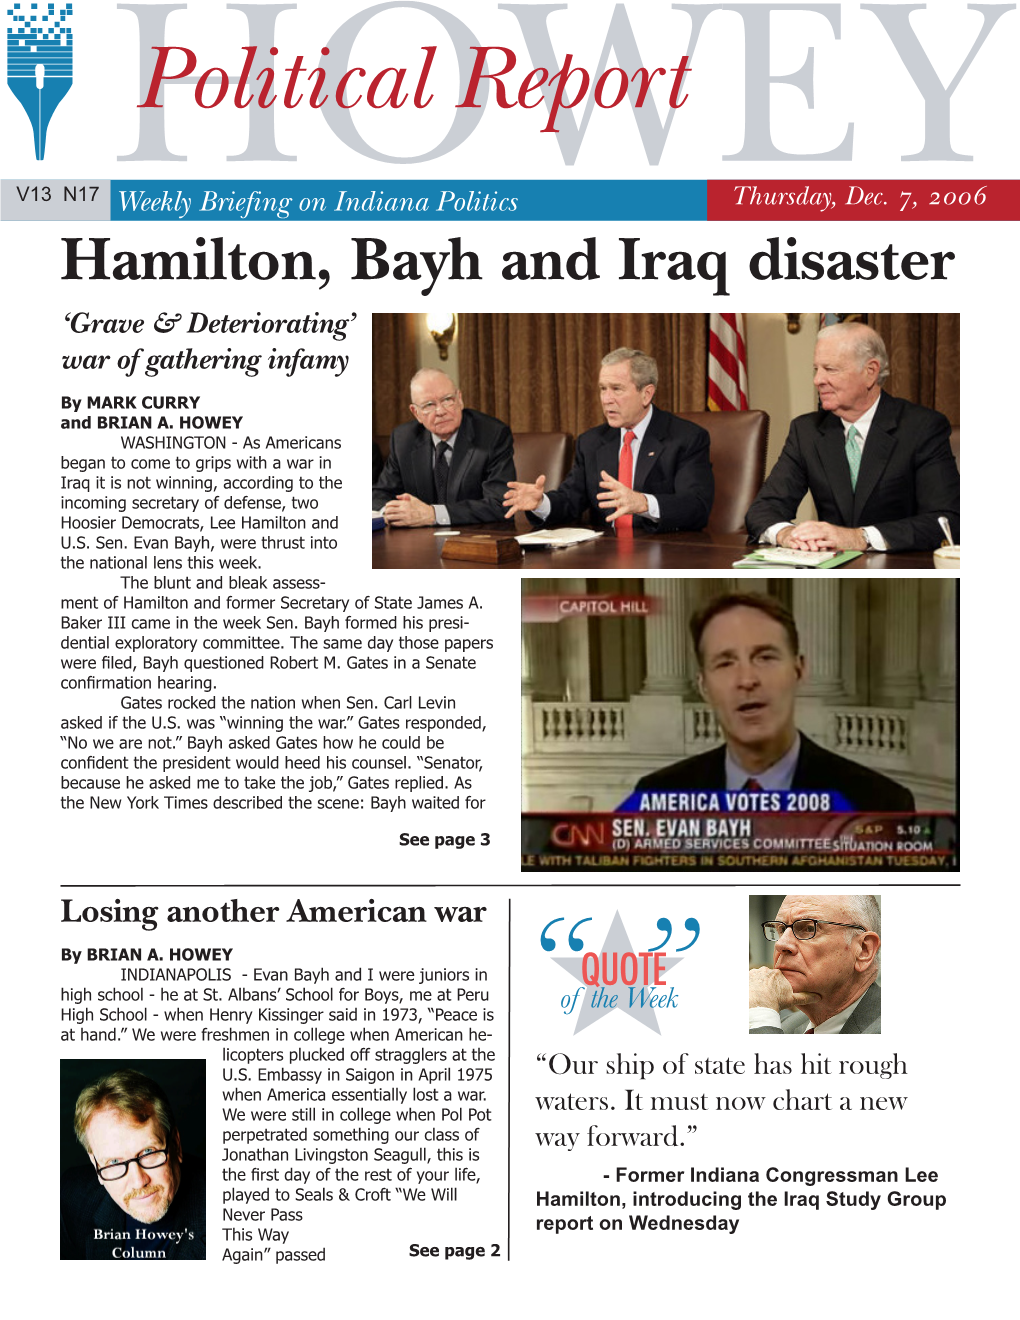 Hamilton, Bayh and Iraq Disaster ‘Grave & Deteriorating’ War of Gathering Infamy